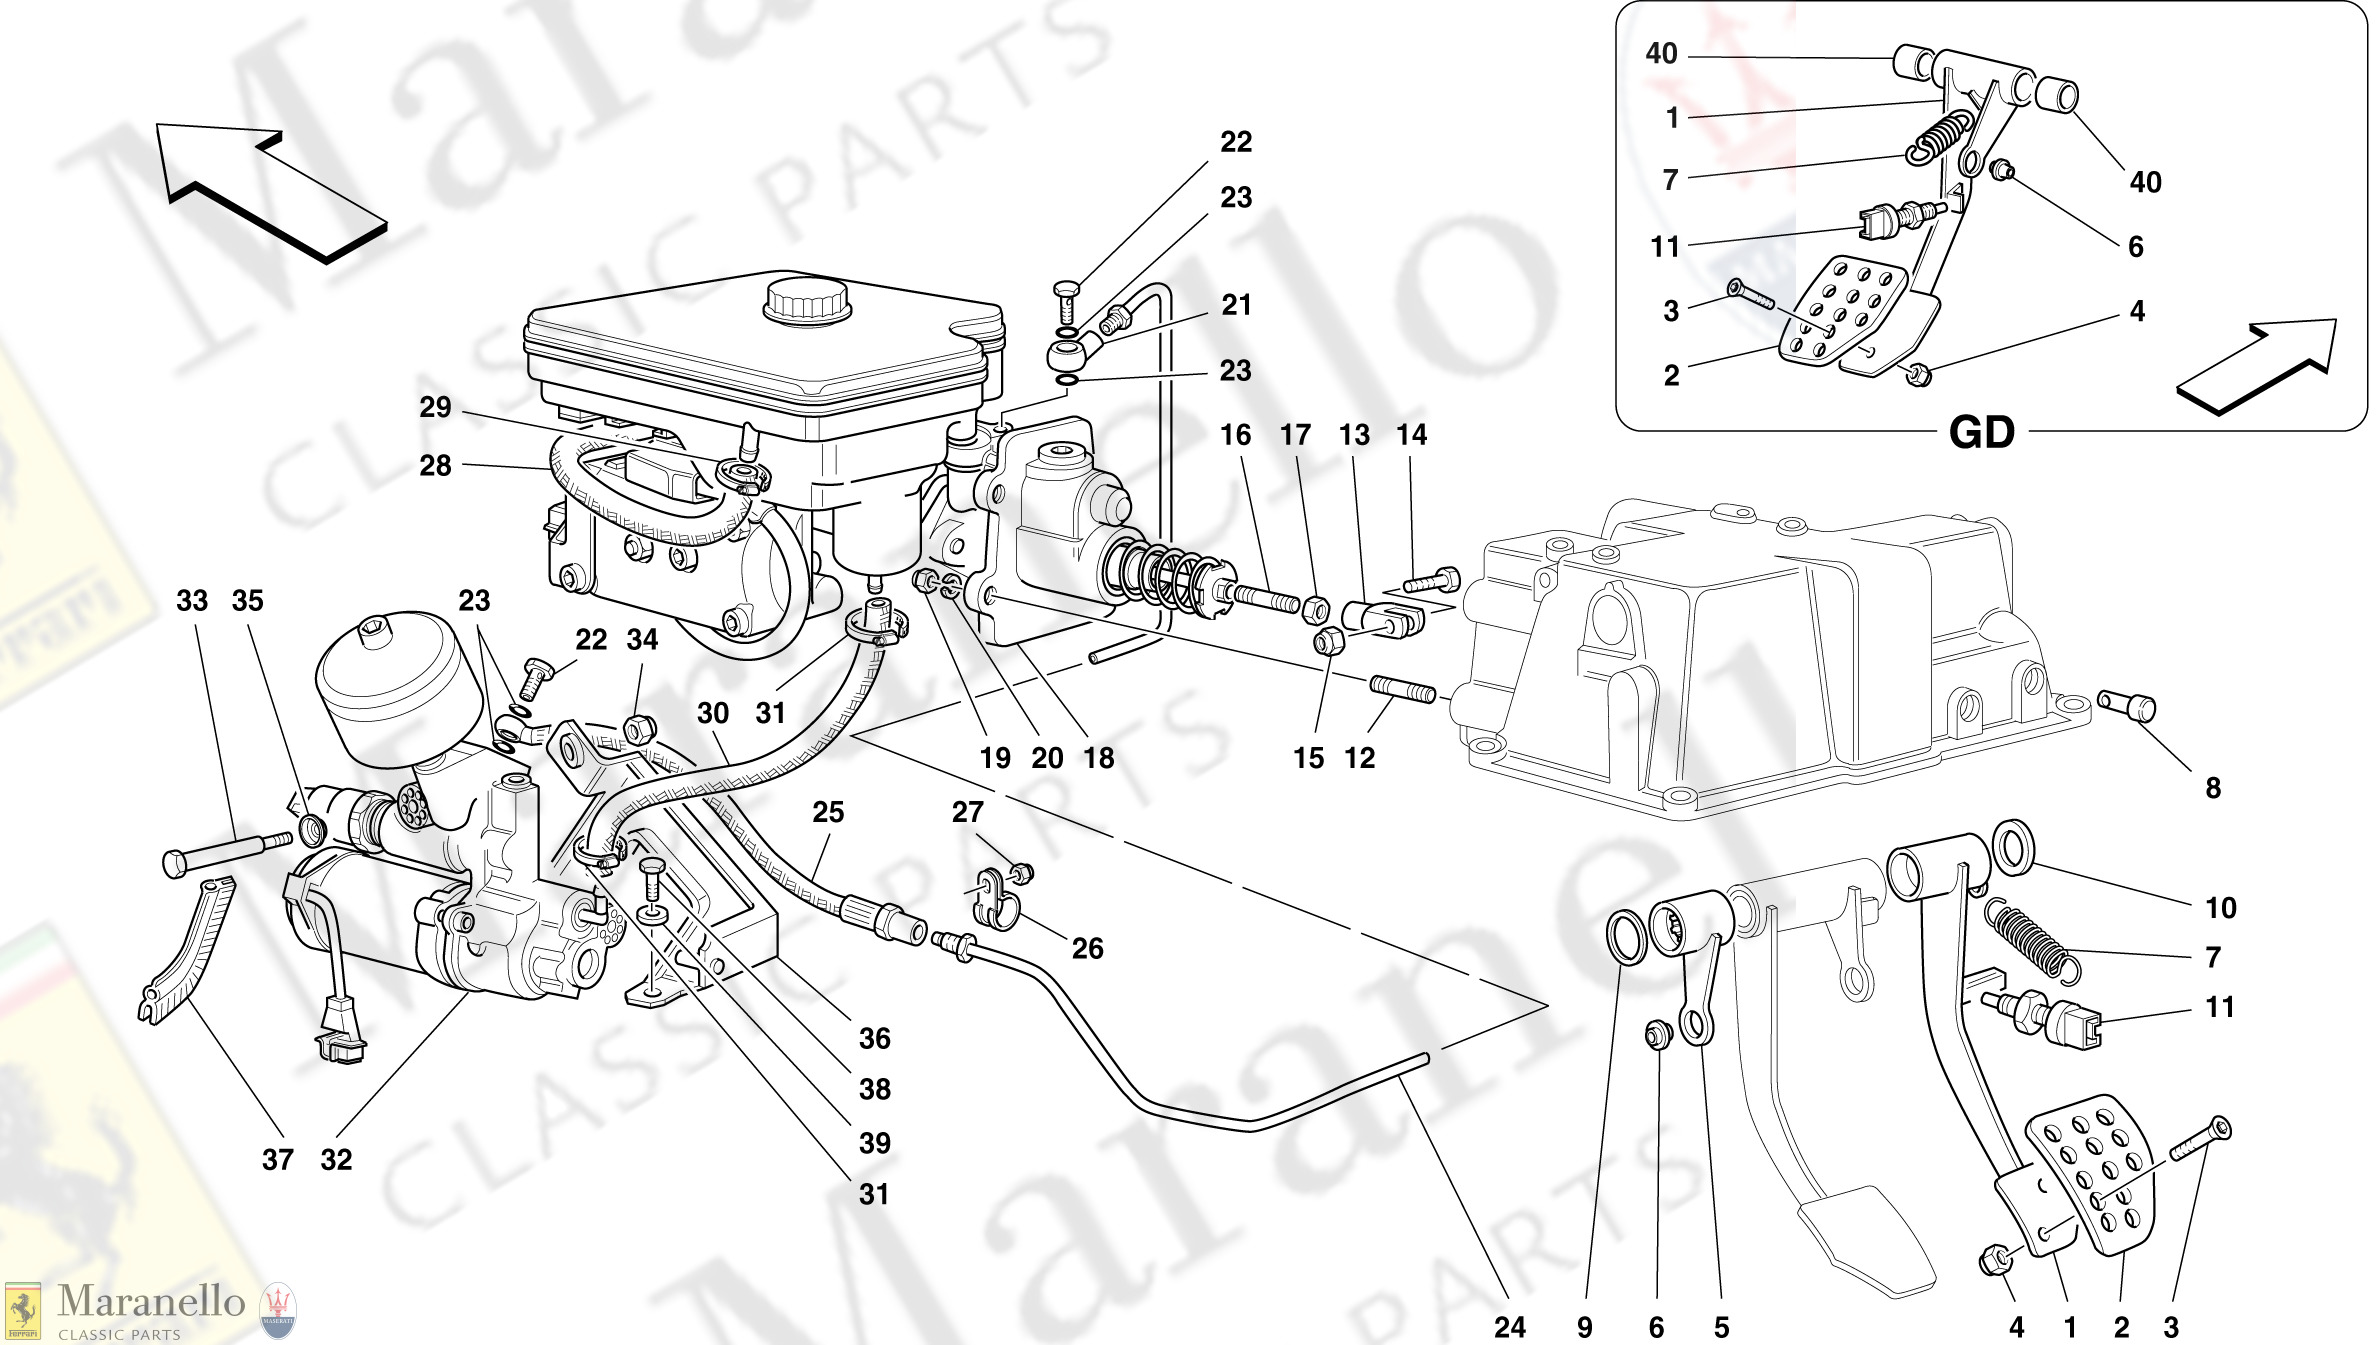 037 - Brake Hydraulic System -Not For Abs Bosch And 355 F1 Cars-